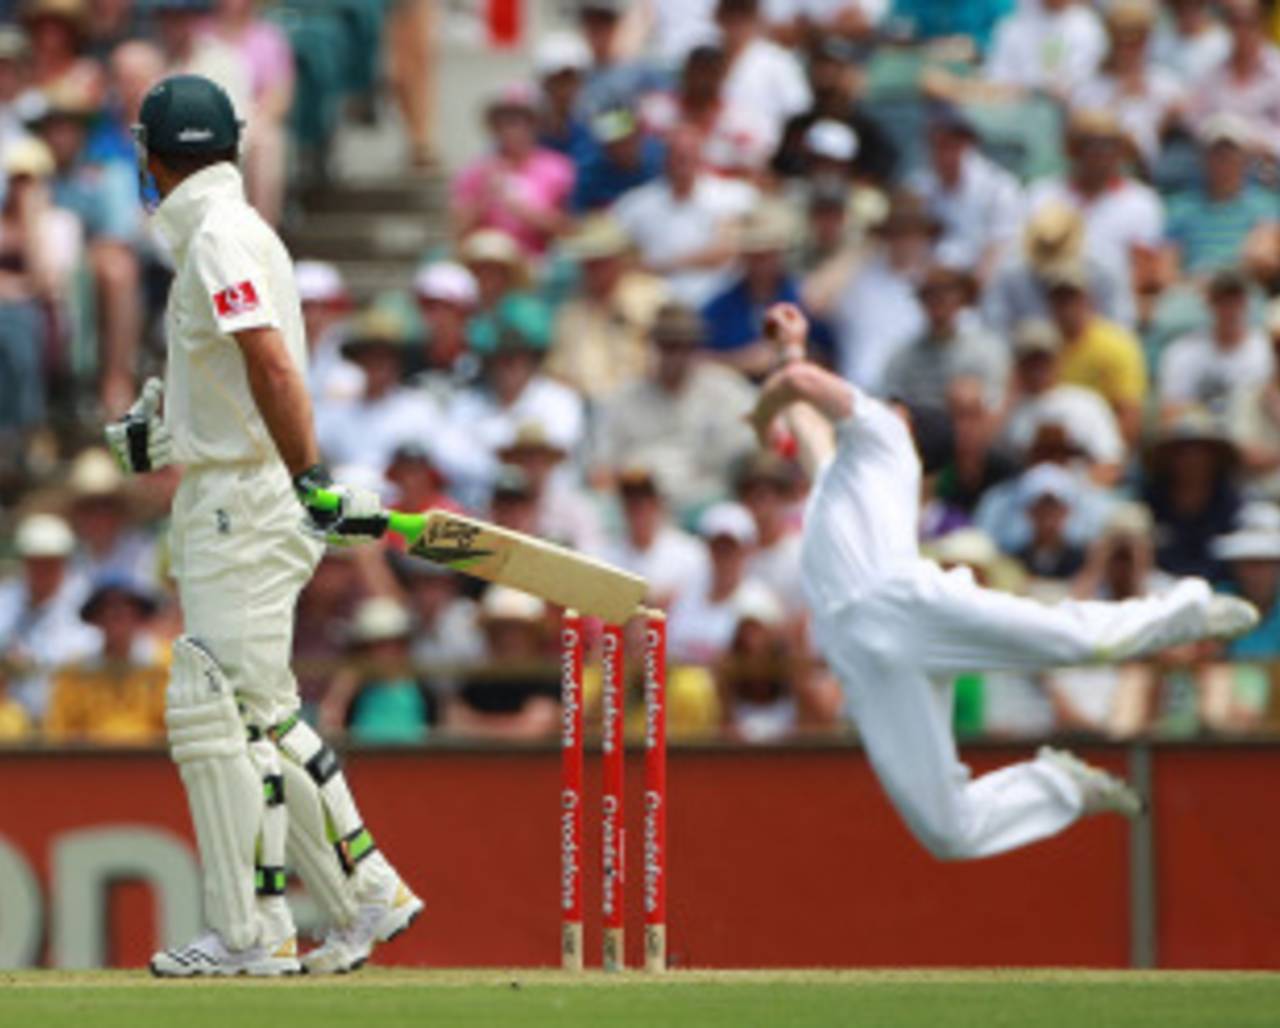 Paul Collingwood held a stunning catch to remove Ricky Ponting, Australia v England, 3rd Test, Perth, 1st day, December 16, 2010